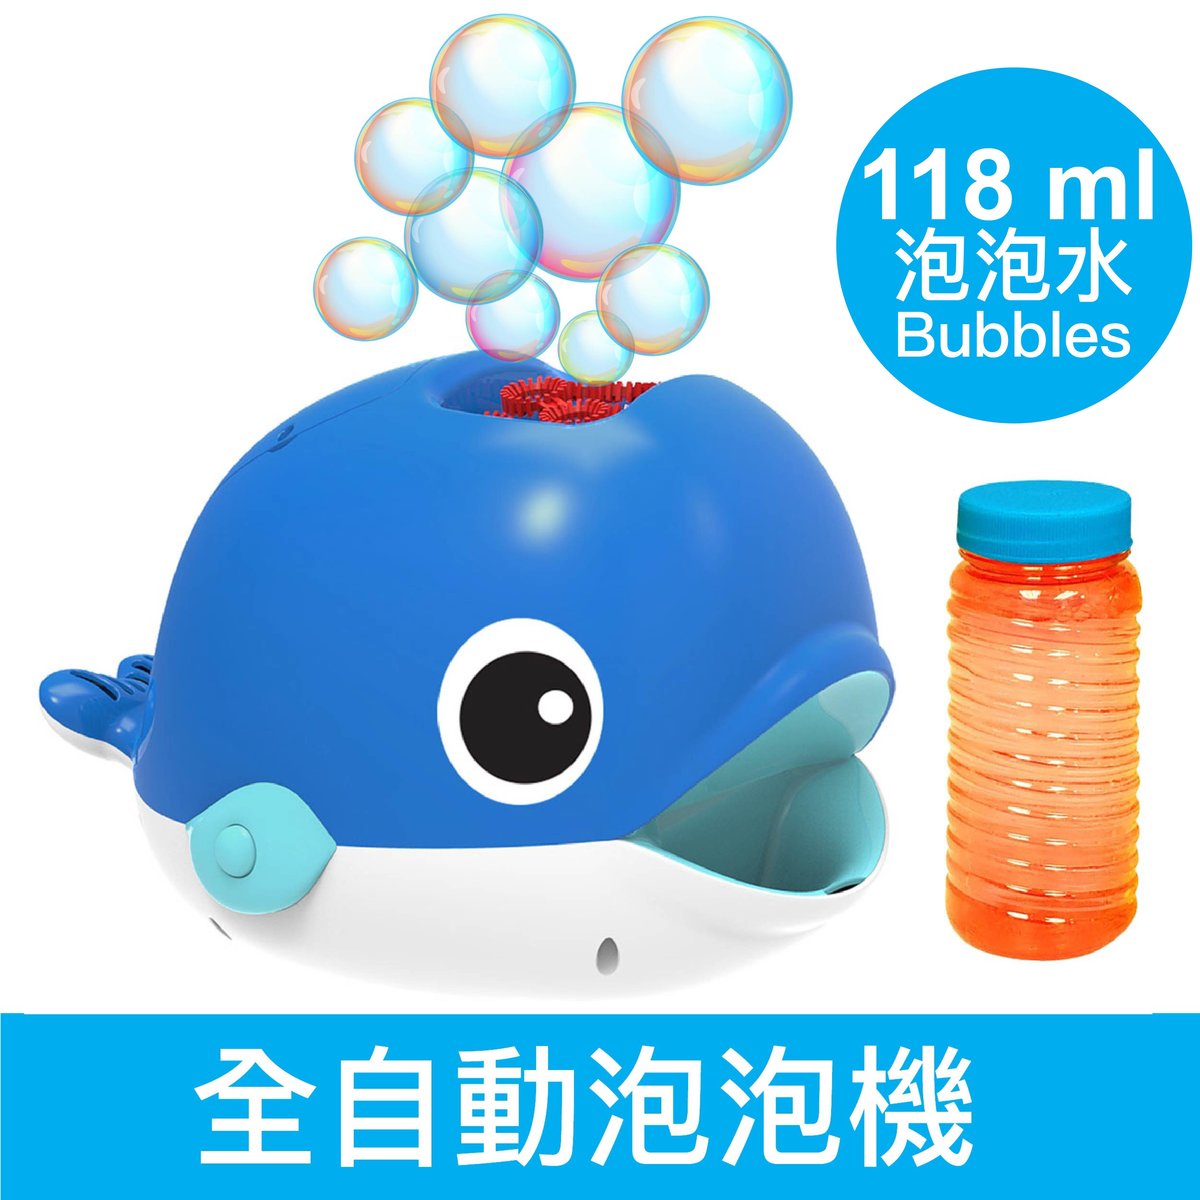 Whale Bubble Machine - Automatic - 1 Bubble Solution (118ml) included - Battery Operated